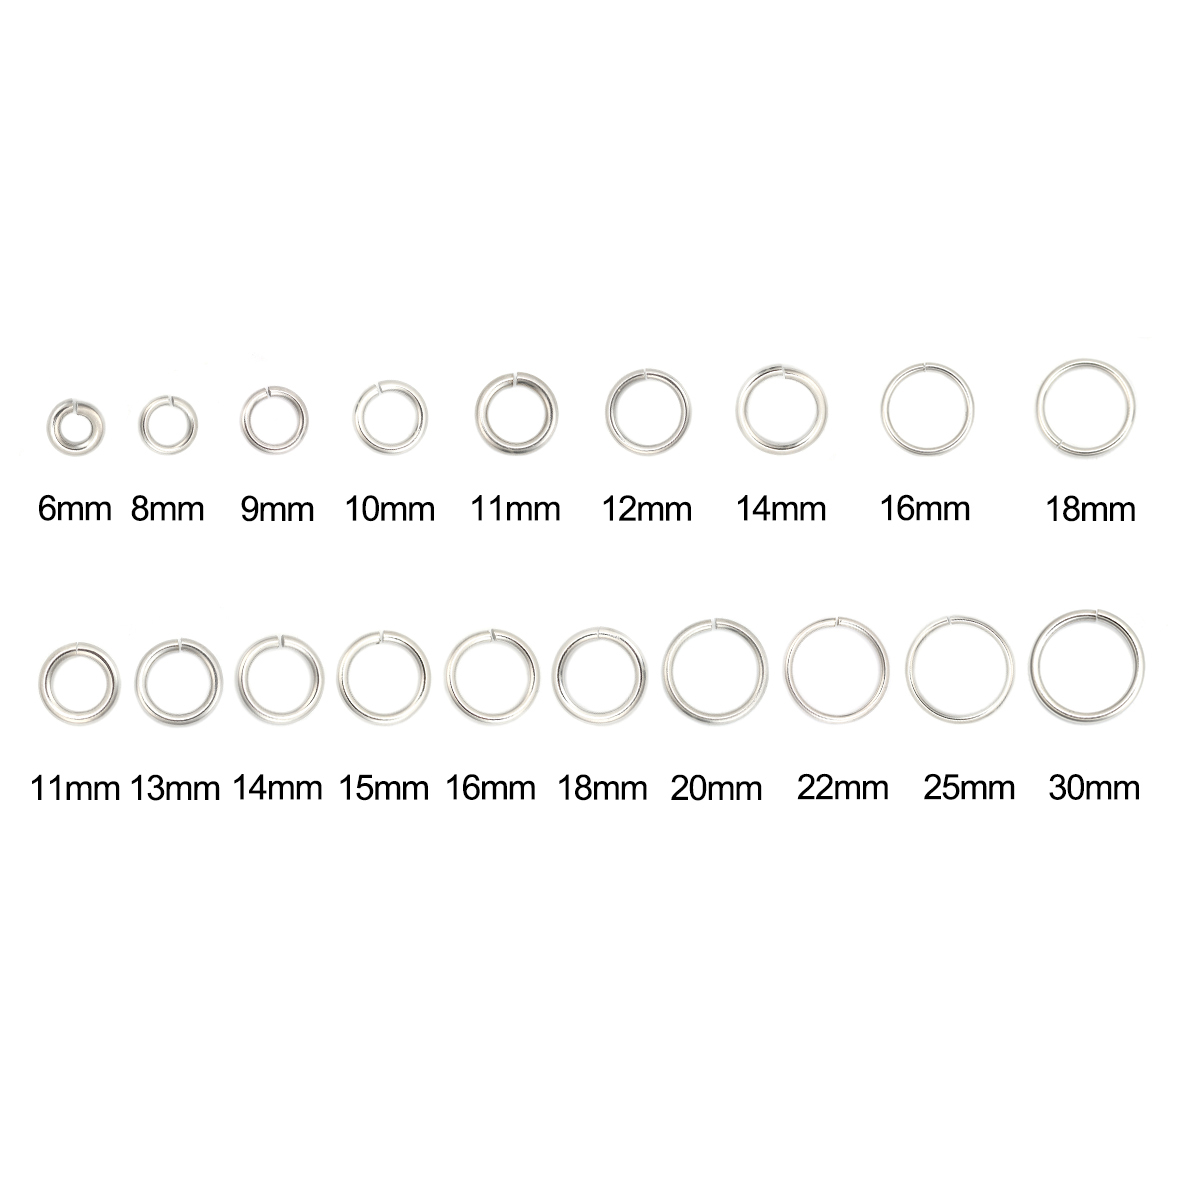 Picture of 1.5mm 304 Stainless Steel Opened Jump Rings Findings Silver Tone 8mm( 3/8") Dia., 100 PCs